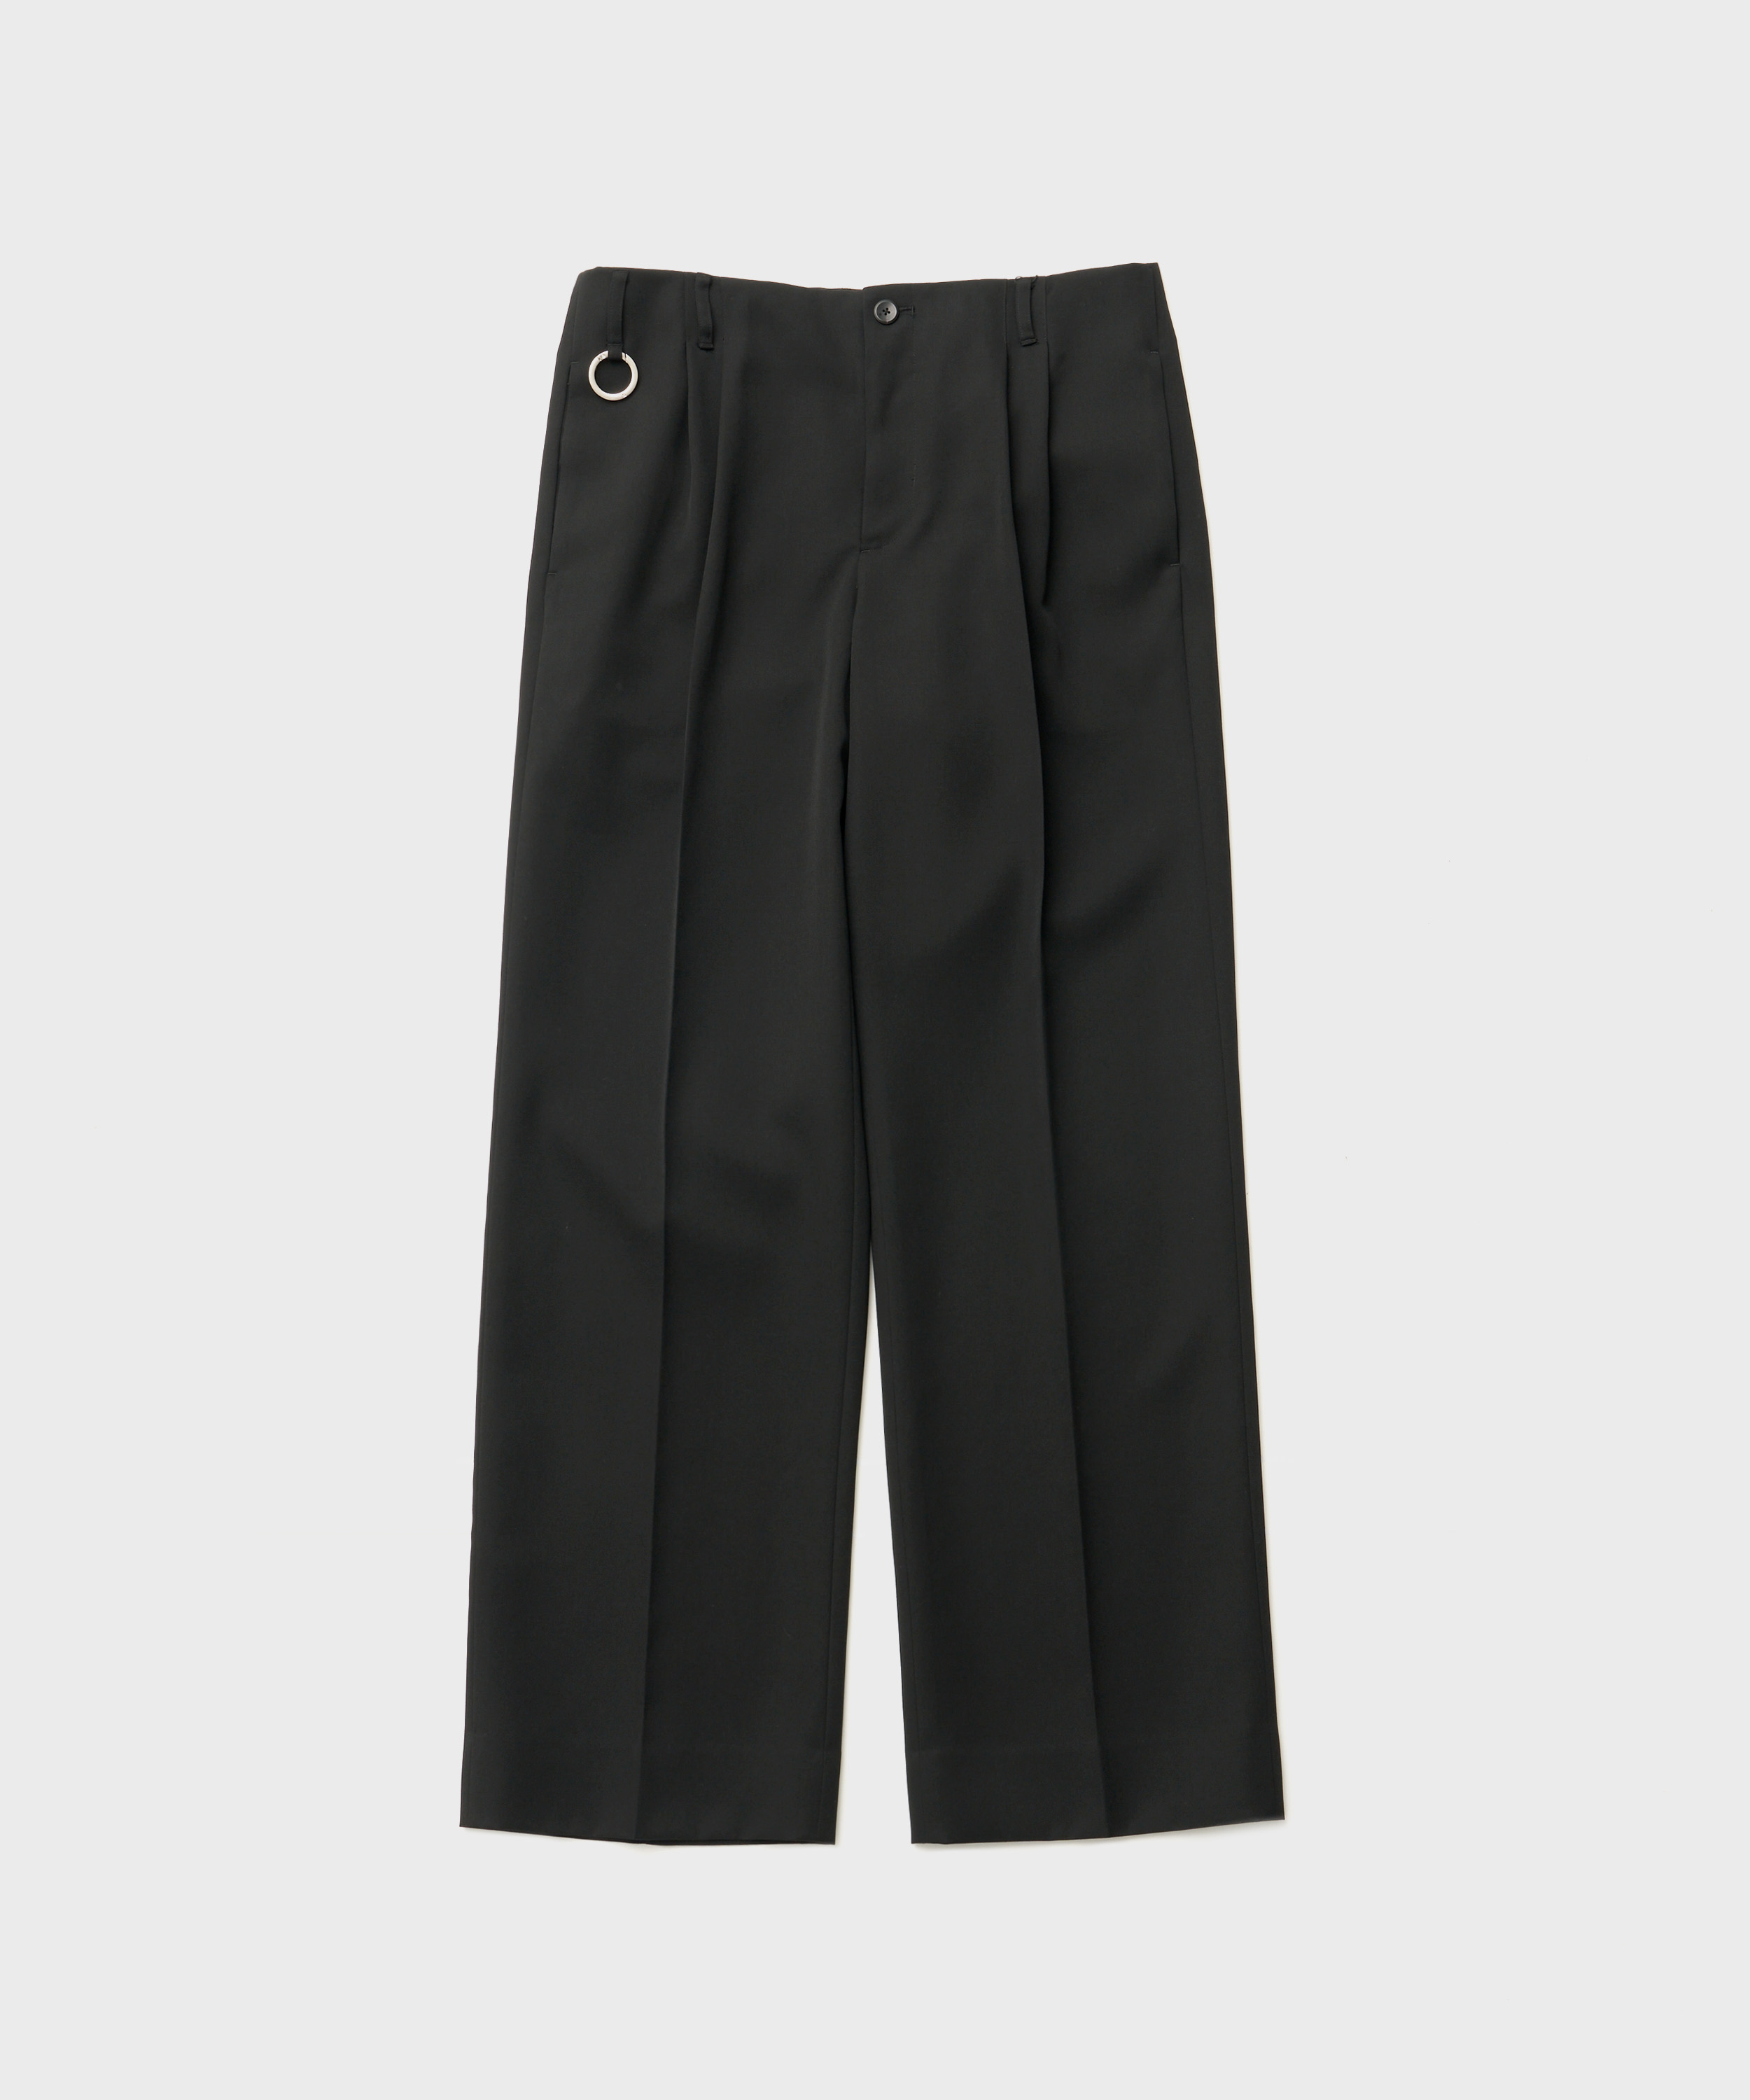 QUINN / Wide Tailored Pants (Black)